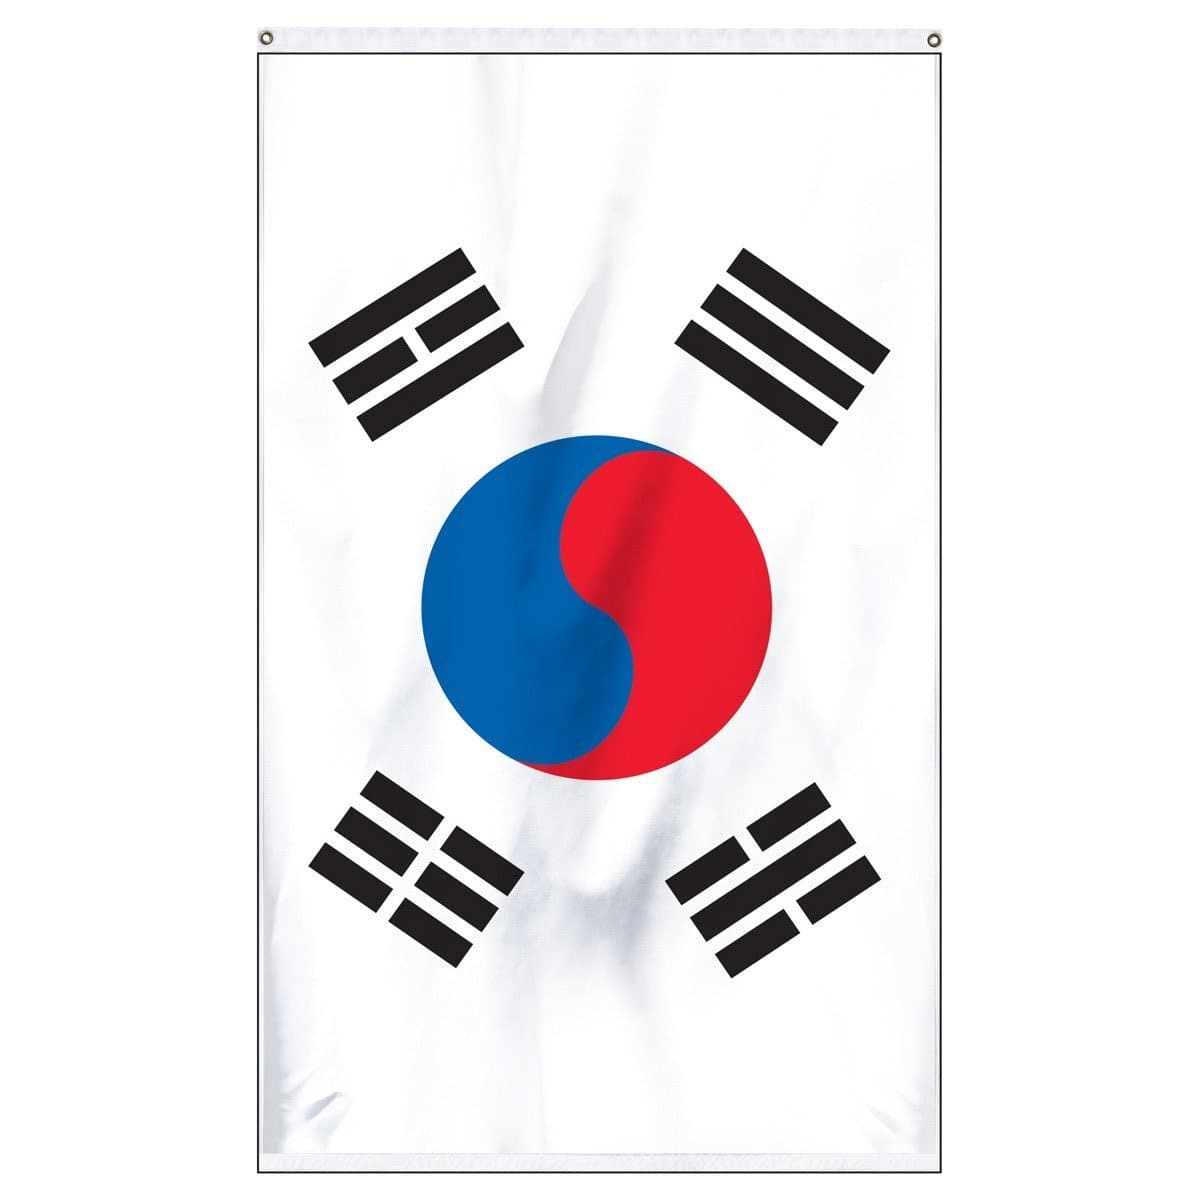 South Korea national flag for sale to buy online. White flag with Korean symbol in the center